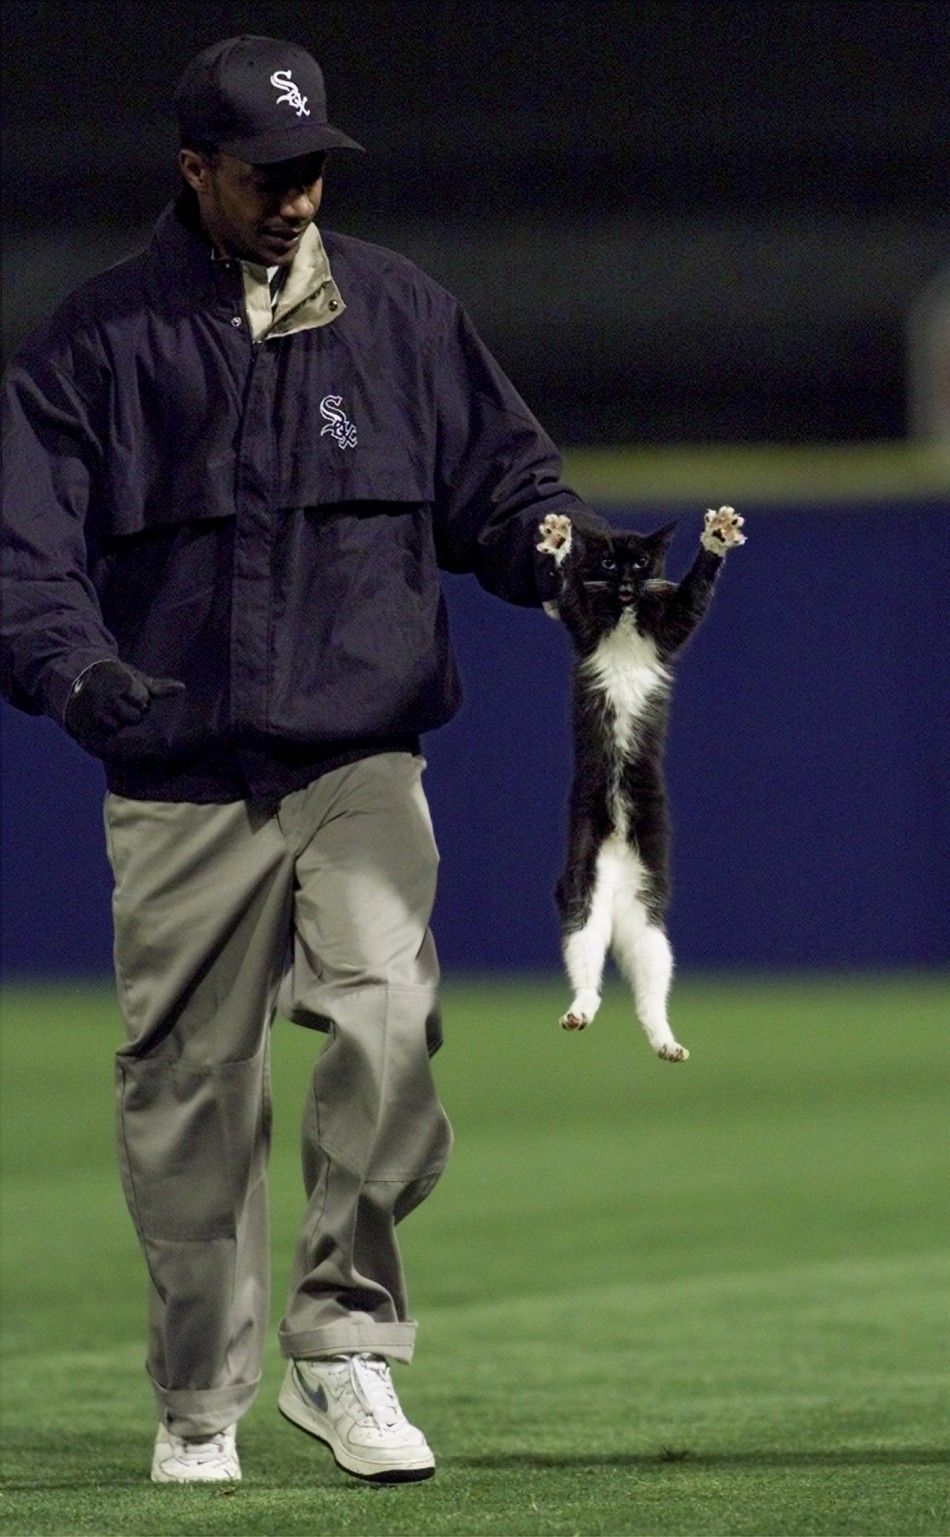 White Sox Grounds crew removes cat from field